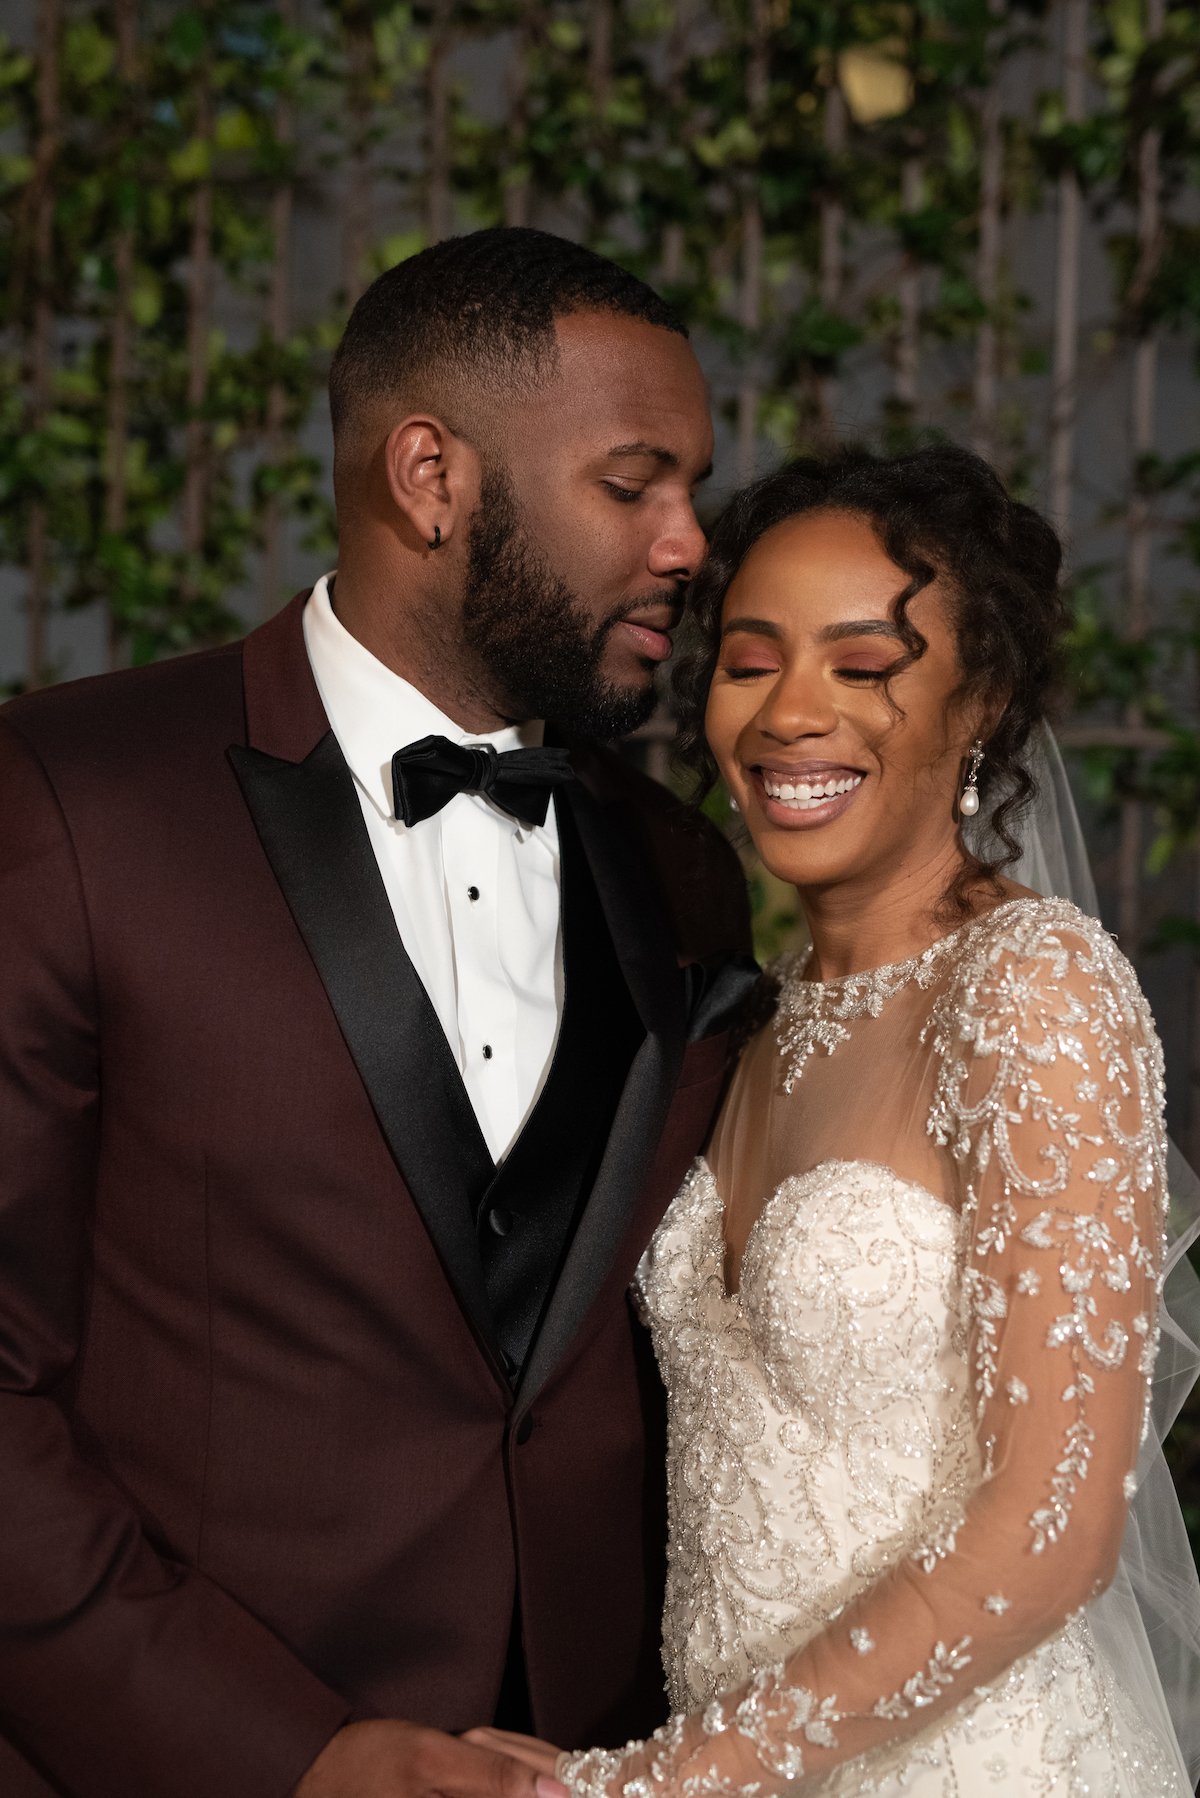 Are ‘Married At First Sight’ Karen And Miles Still Together?